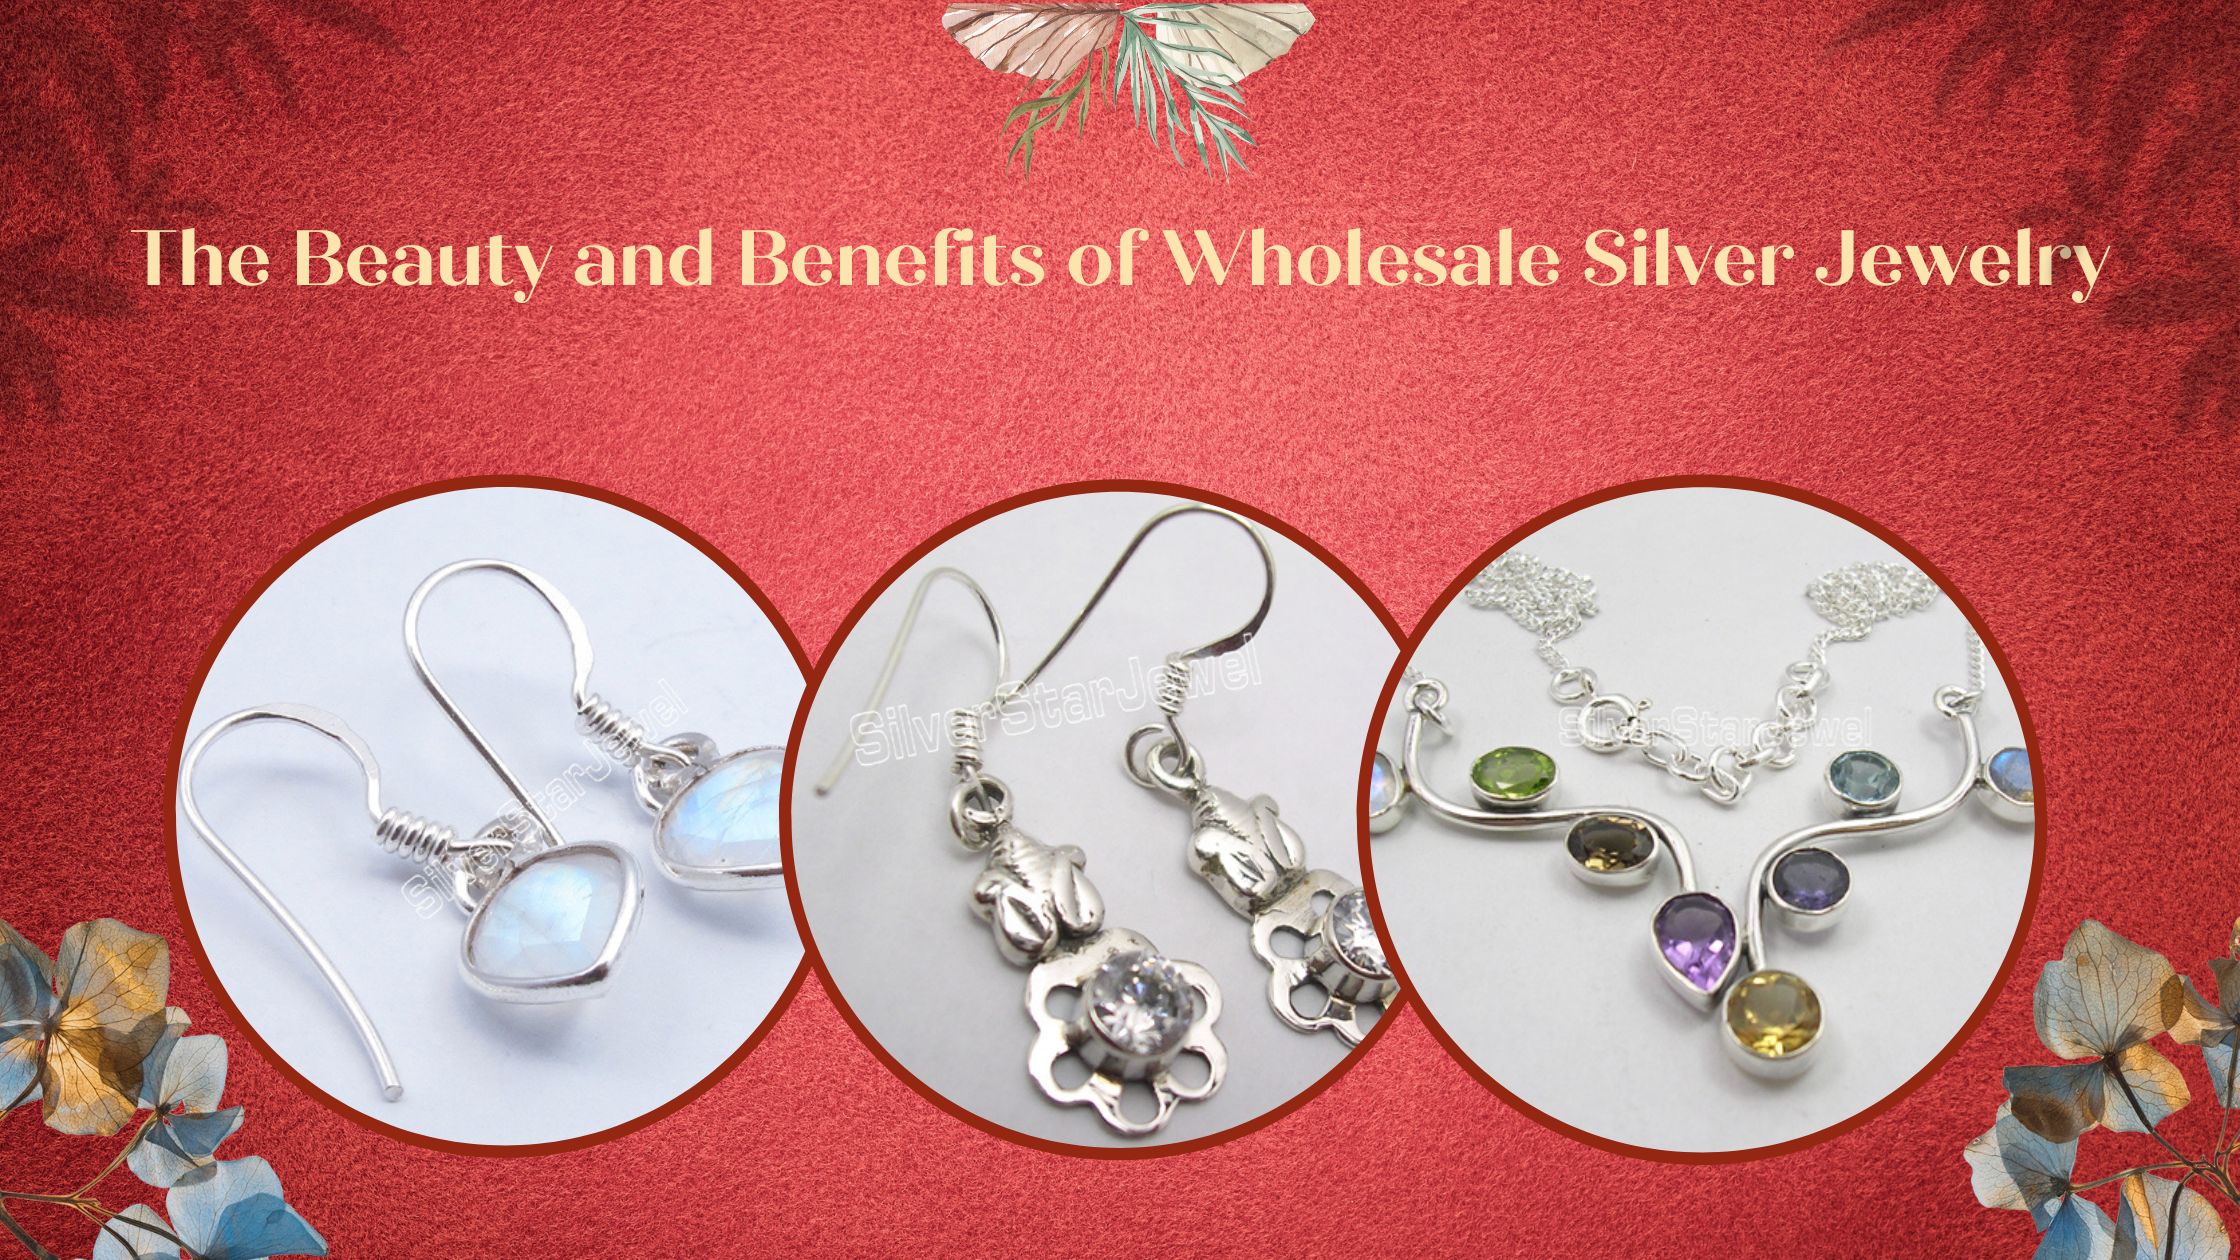 The Beauty and Benefits of Wholesale Silver Jewelry